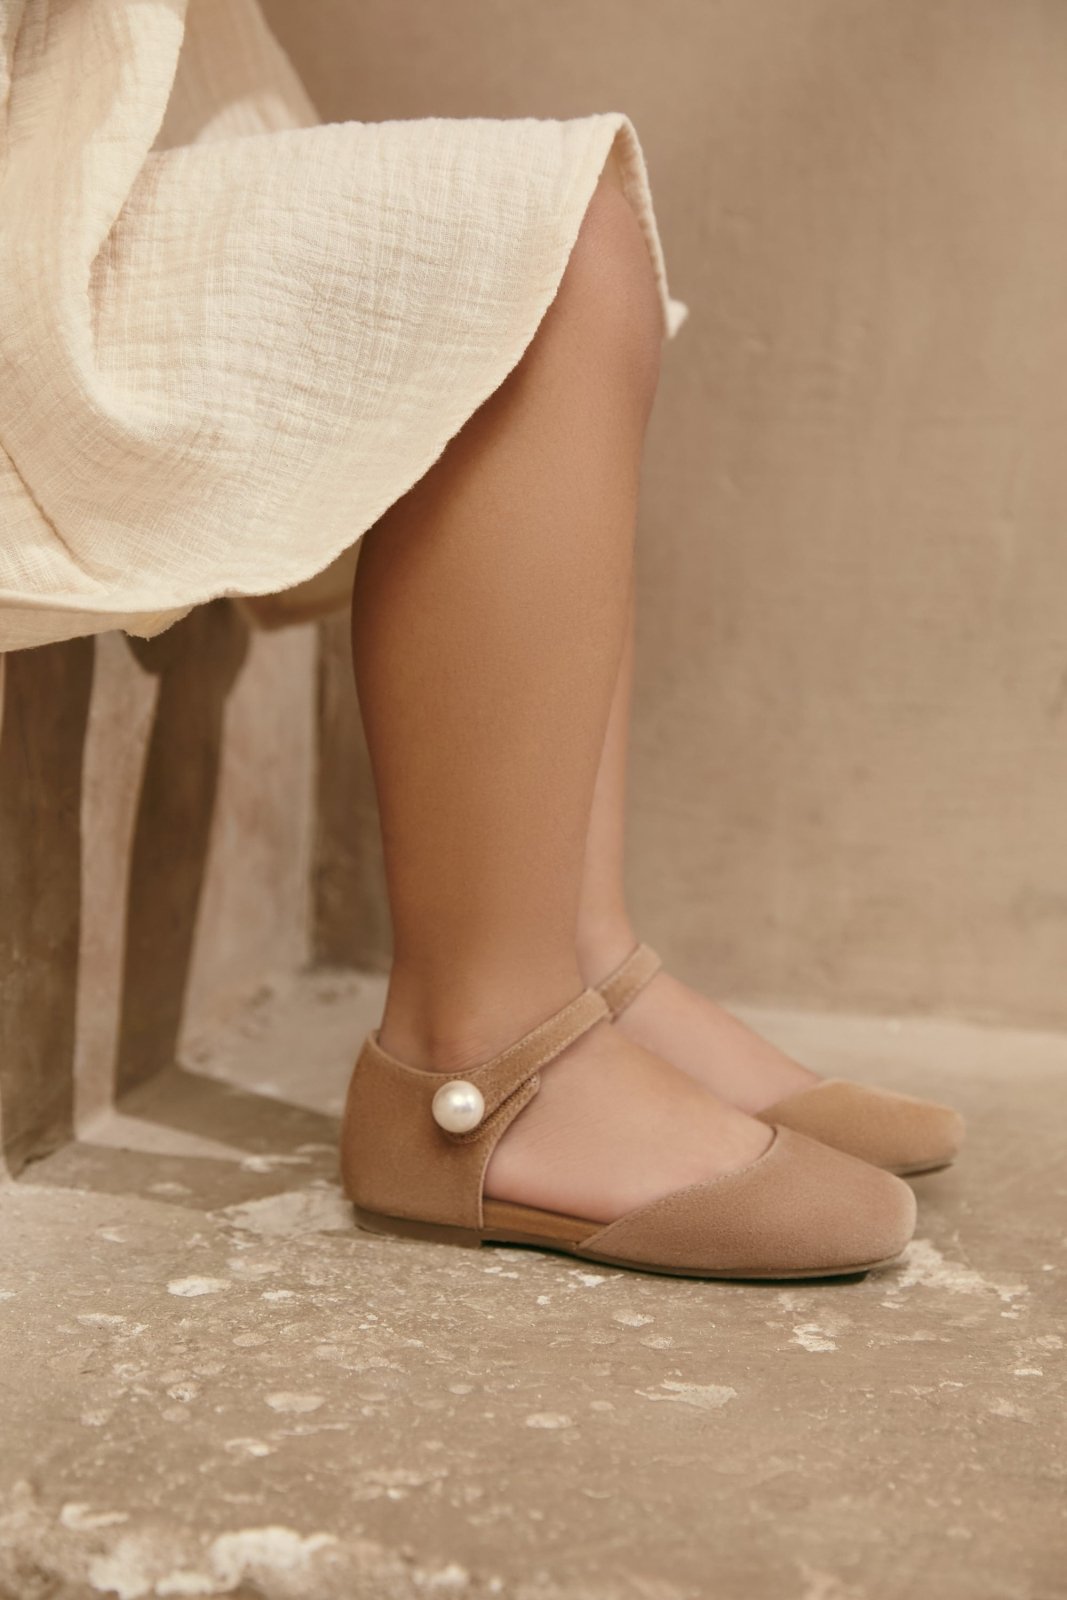 Libby Dark Beige Shoes by Age of Innocence